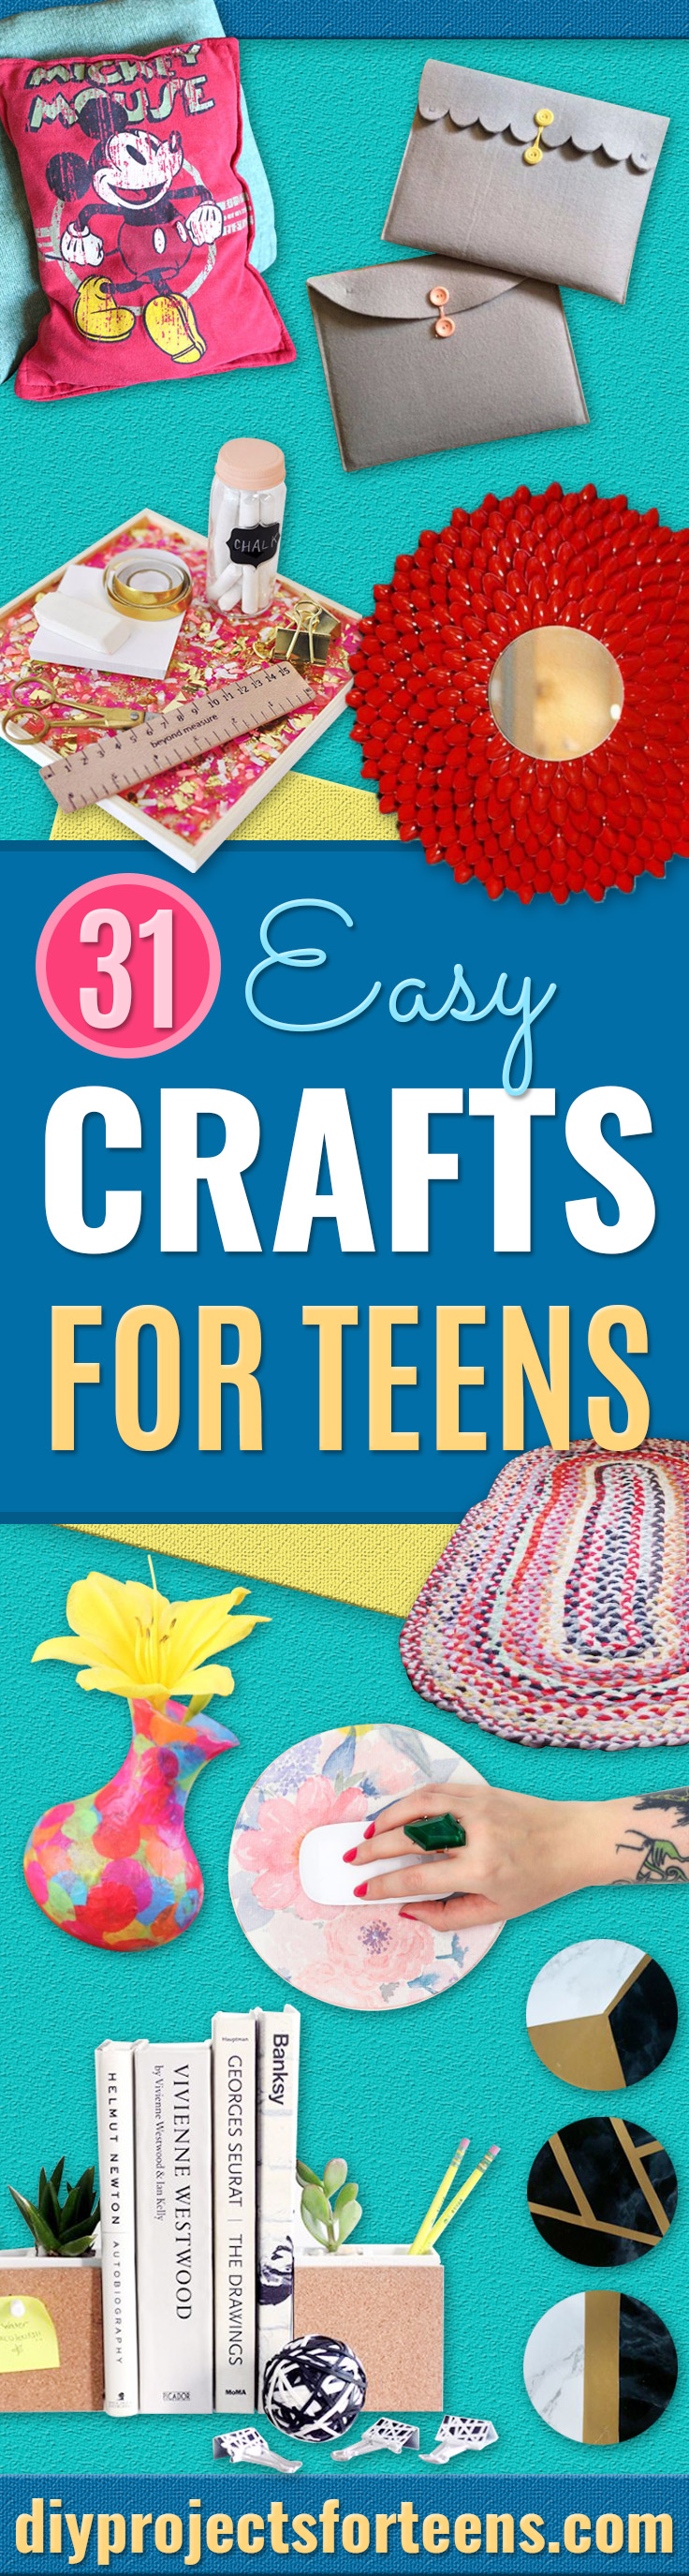 Easy Crafts for Teens - Cheap and Easy DIY Projects for Teenagers - Learn Basic Craft Techniques and Tutorials for Learning The Basics for Do It Yourself Projects and Fun Crafts - Easy Step by Step Tutorials for Making Pom Poms, Using a Glue Gun, Painting How To and More - Cool Ideas for Teens, Teenagers and Adults - Cheap Arts and Crafts Ideas and Tips 